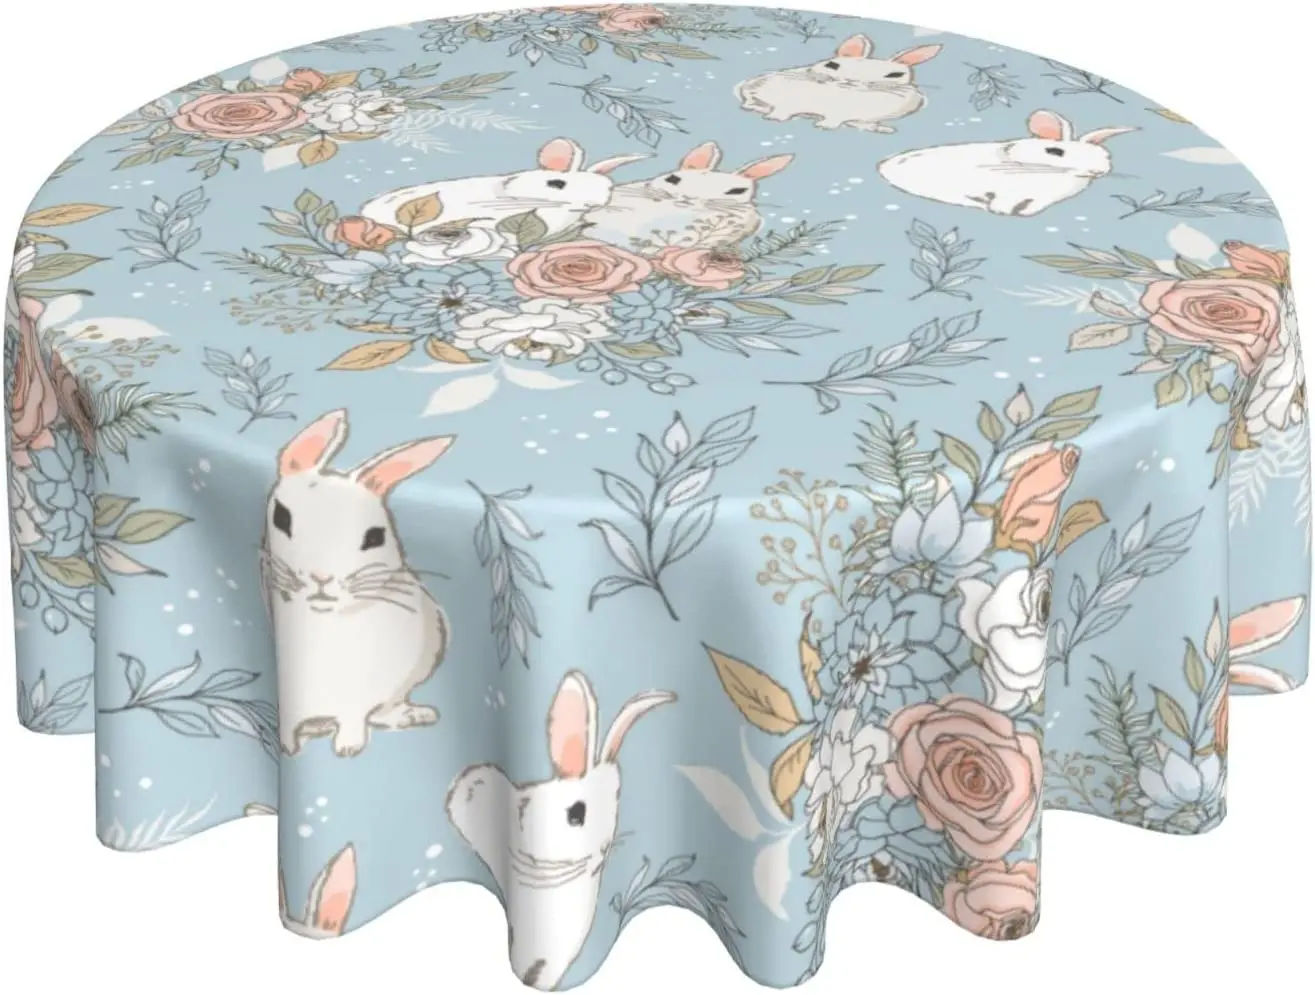 

Spring Easter Tablecloth Round 60 Inch White Bunny Table Cloth Waterproof Farmhouse Teal Floral Tablecloths for Holiday Party